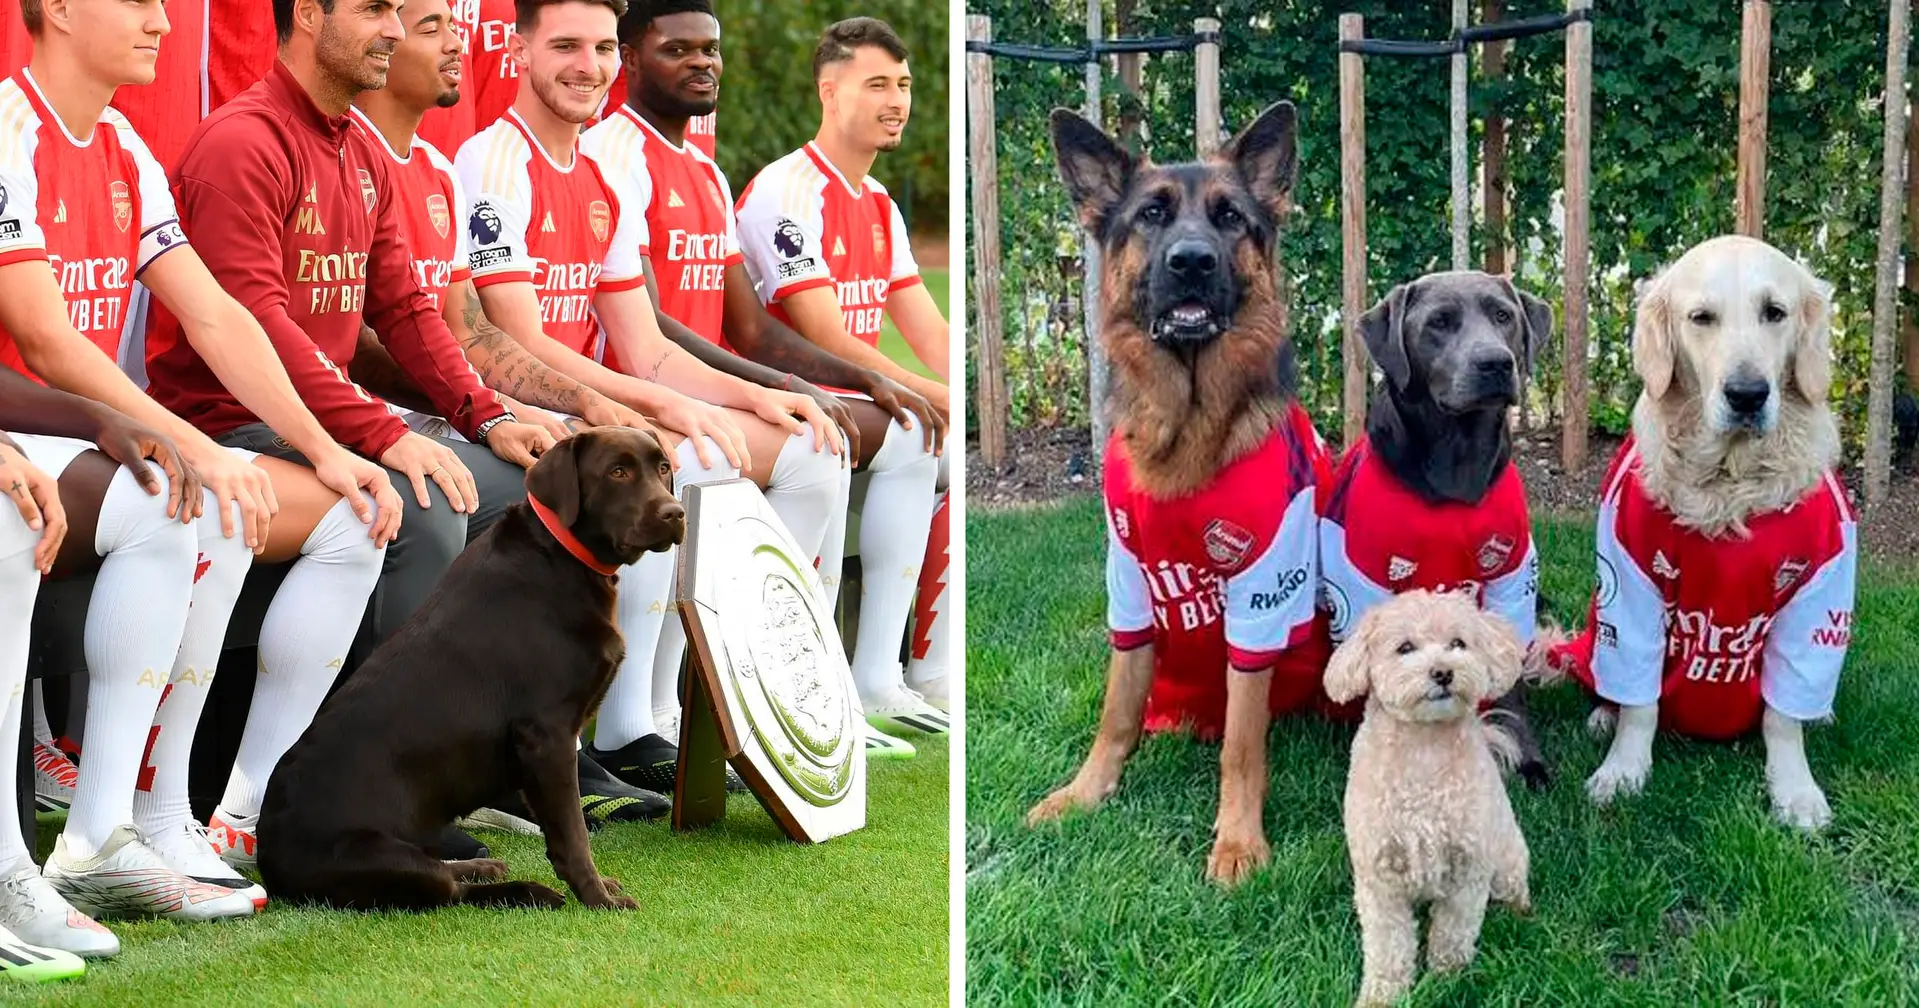 Arsenal players & some of their pets - the number of good boys in this post is off the charts